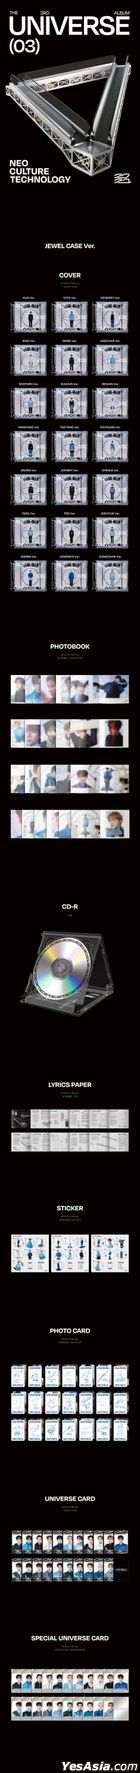 NCT Vol. 3 - Universe (Jewel Case Version) (Do Young Version) + Poster in Tube